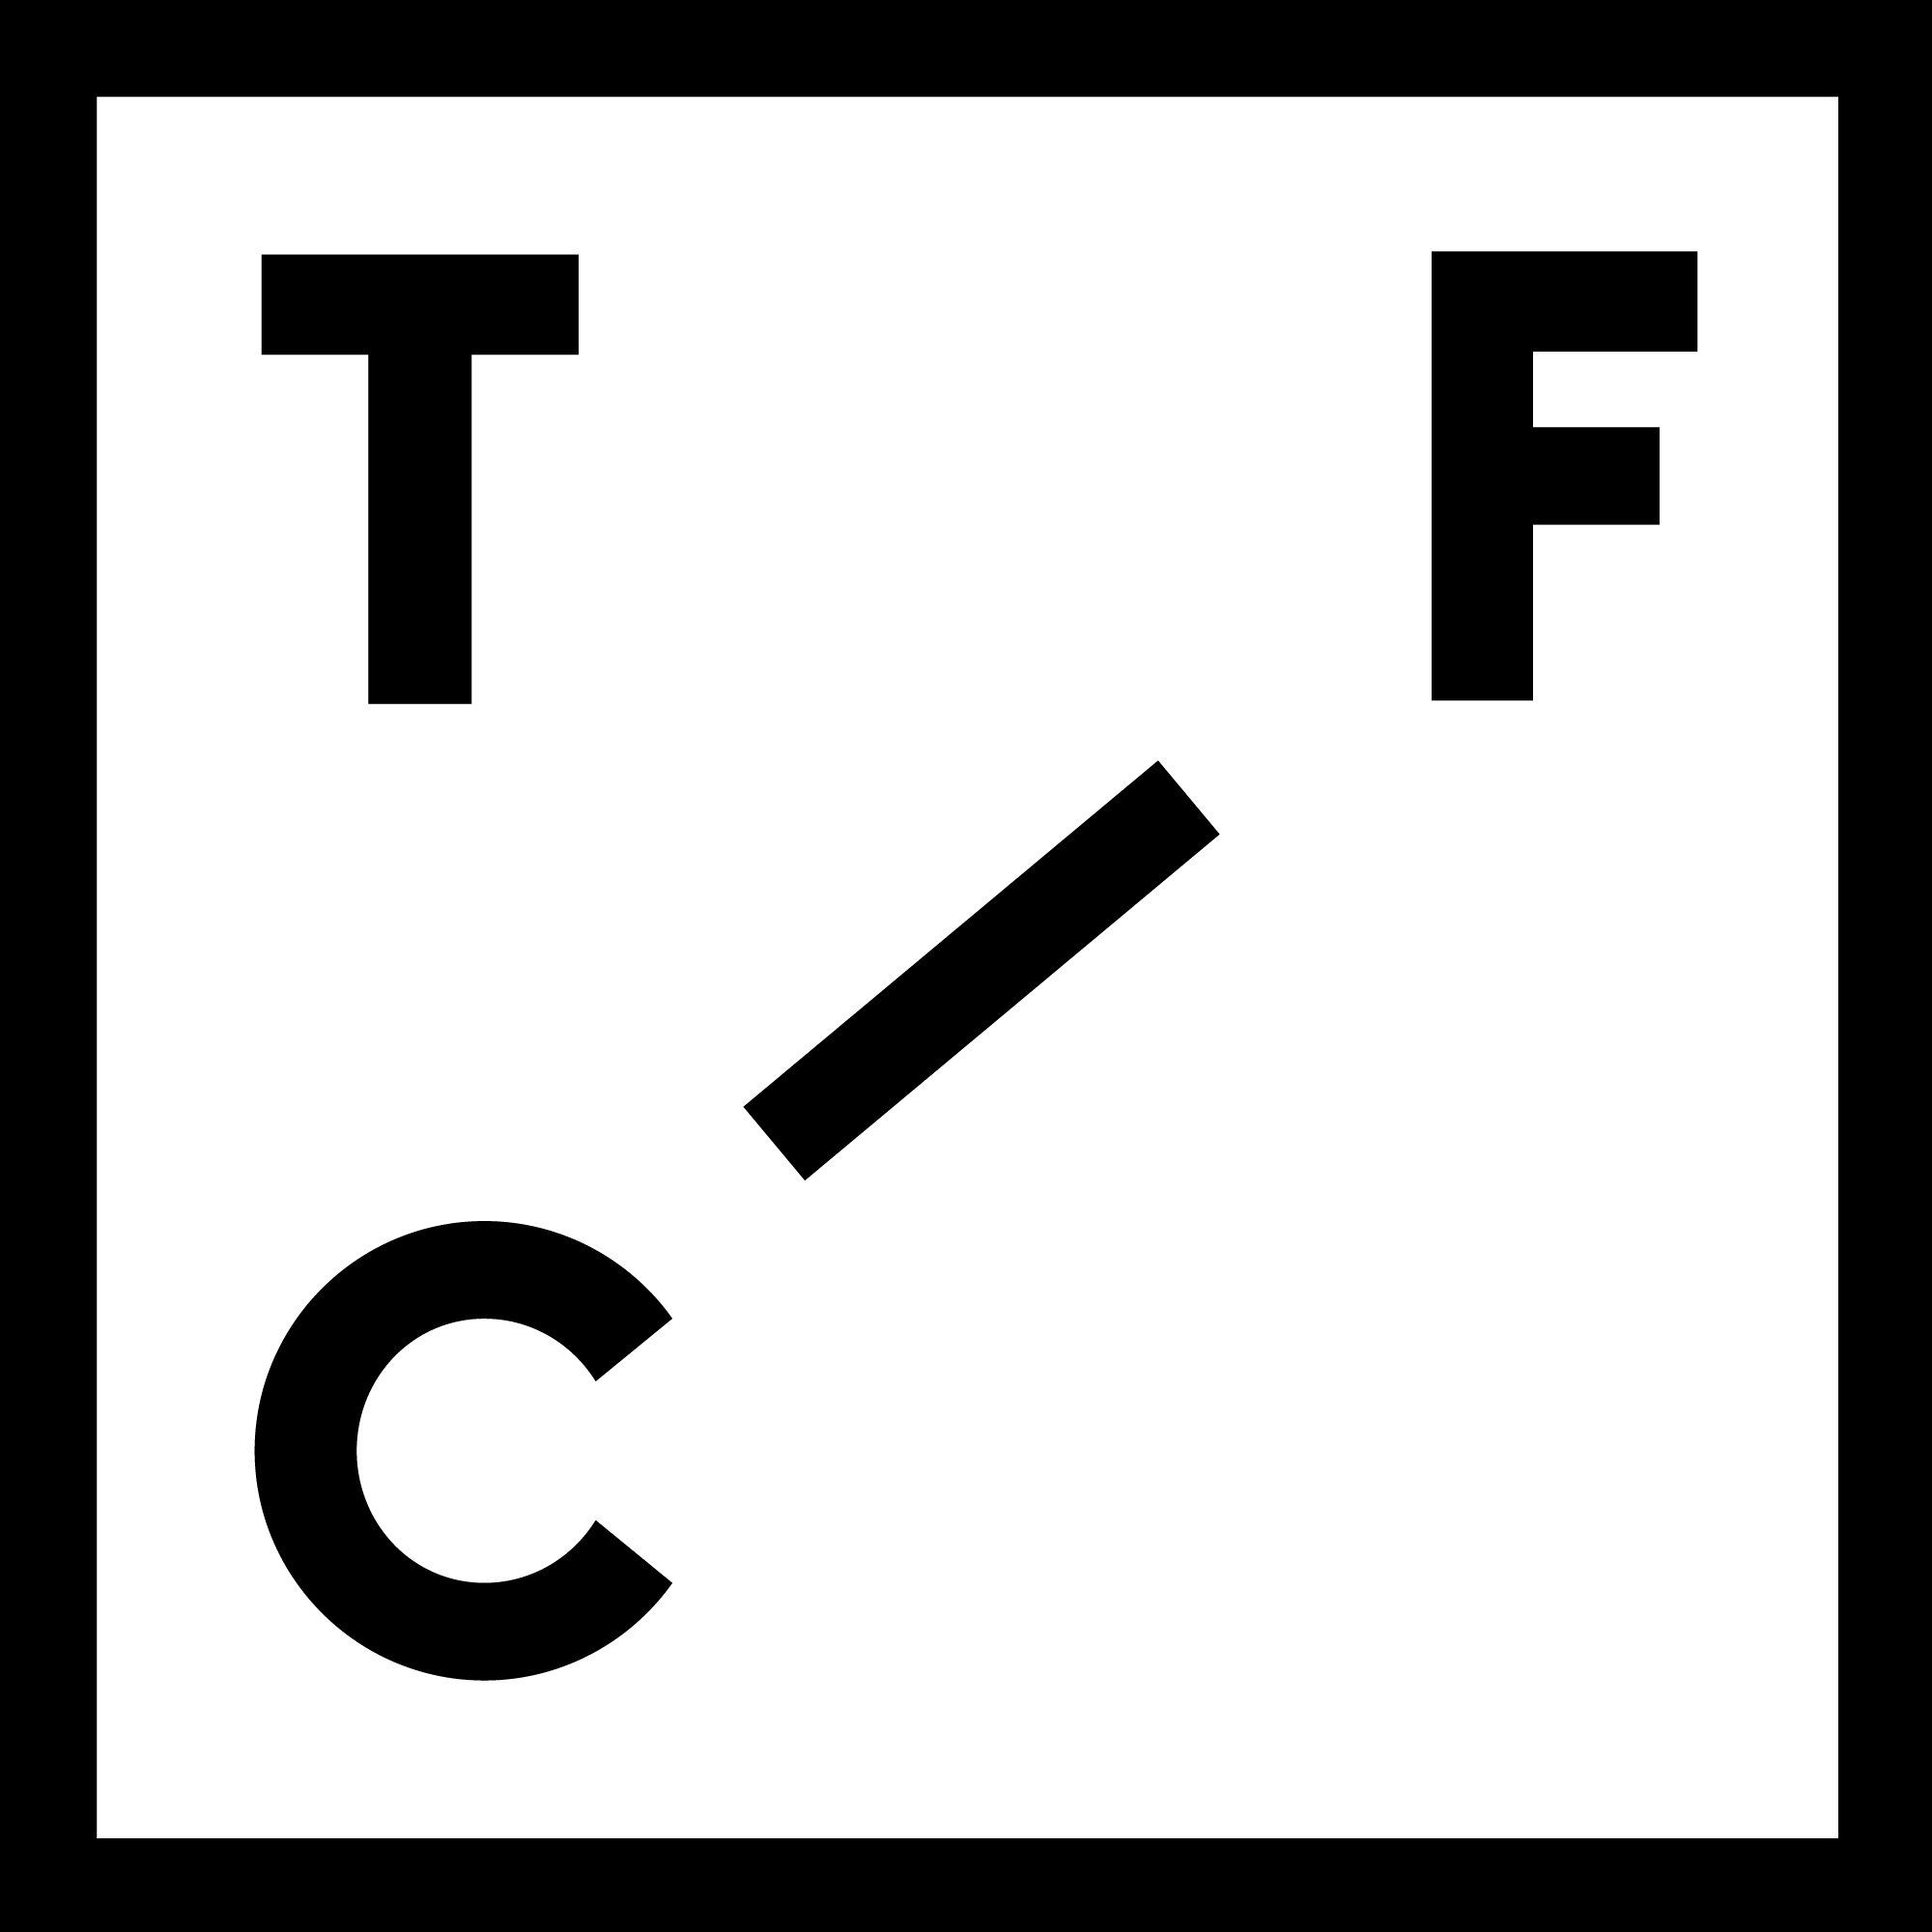 TFC Research and Innovation Limited